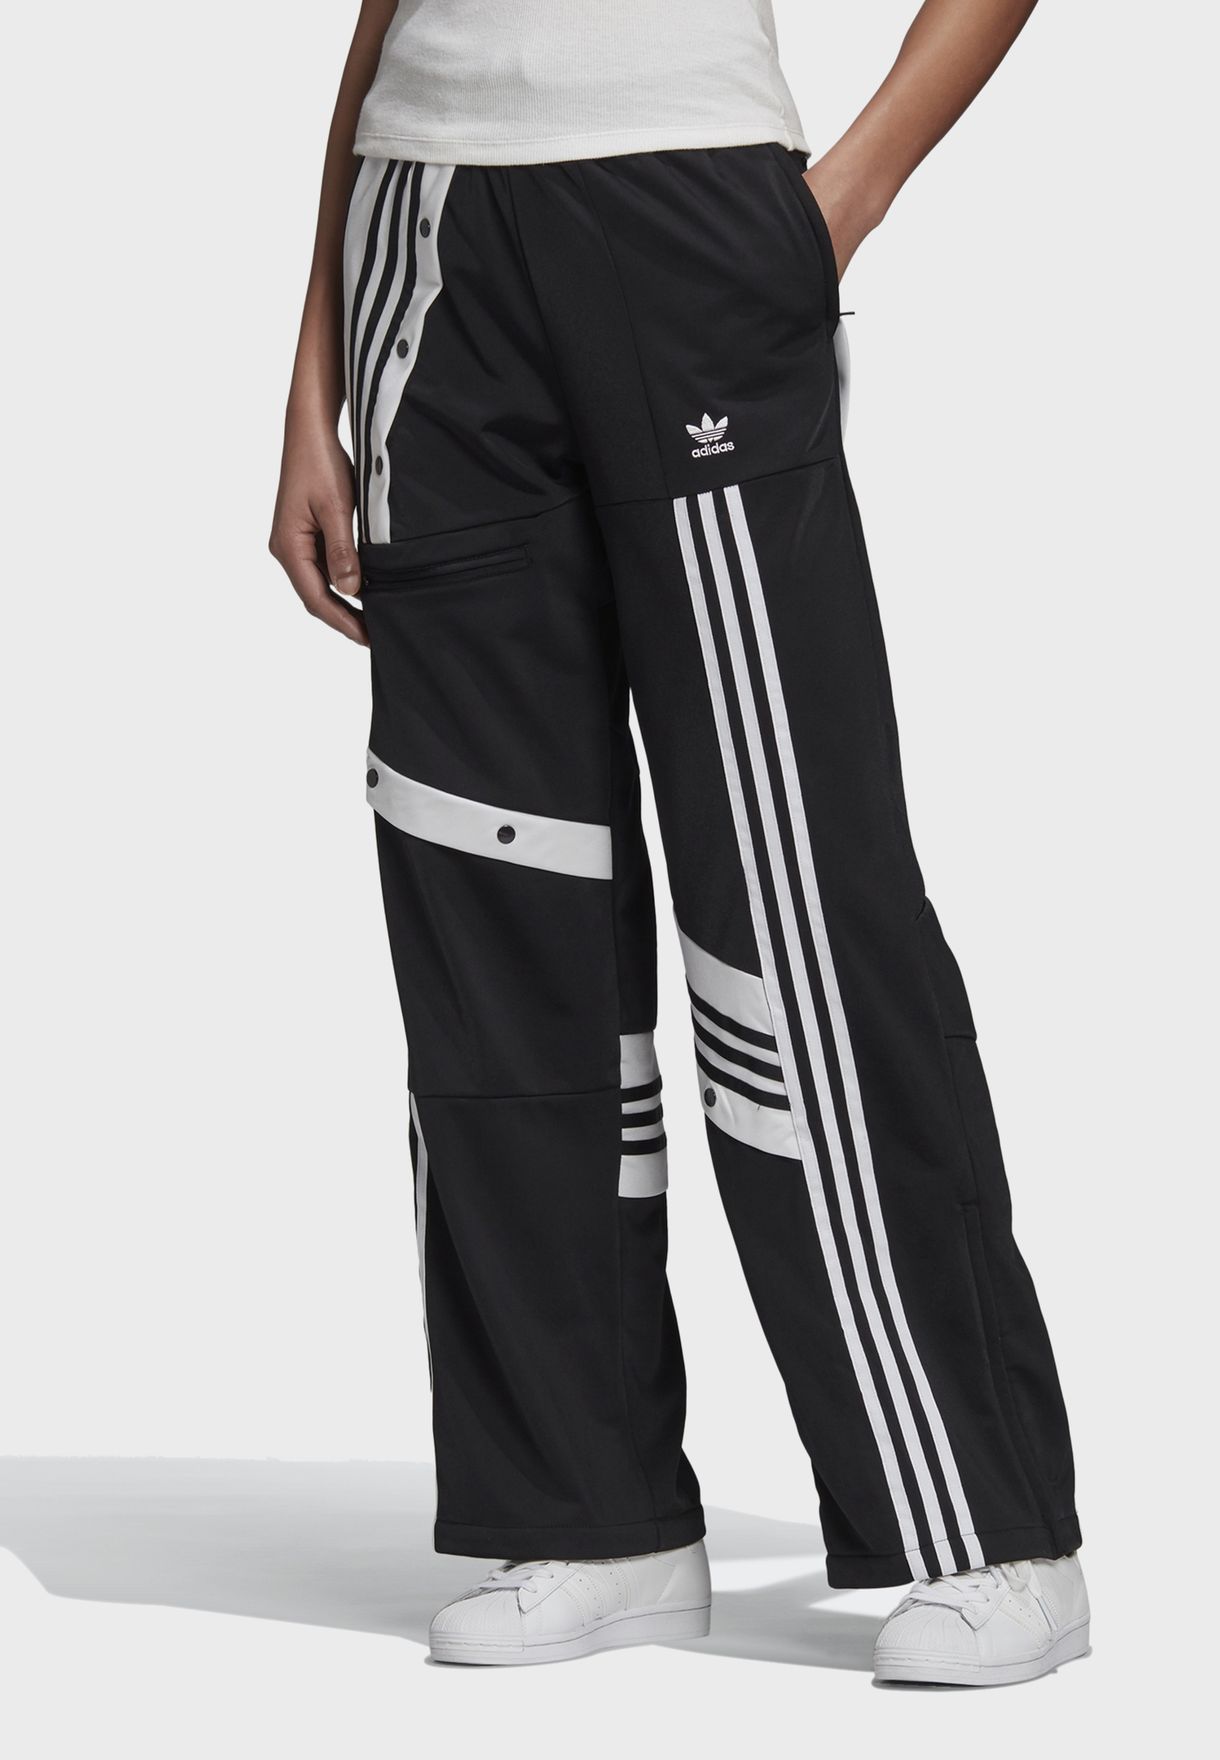 adidas women's pants with pockets